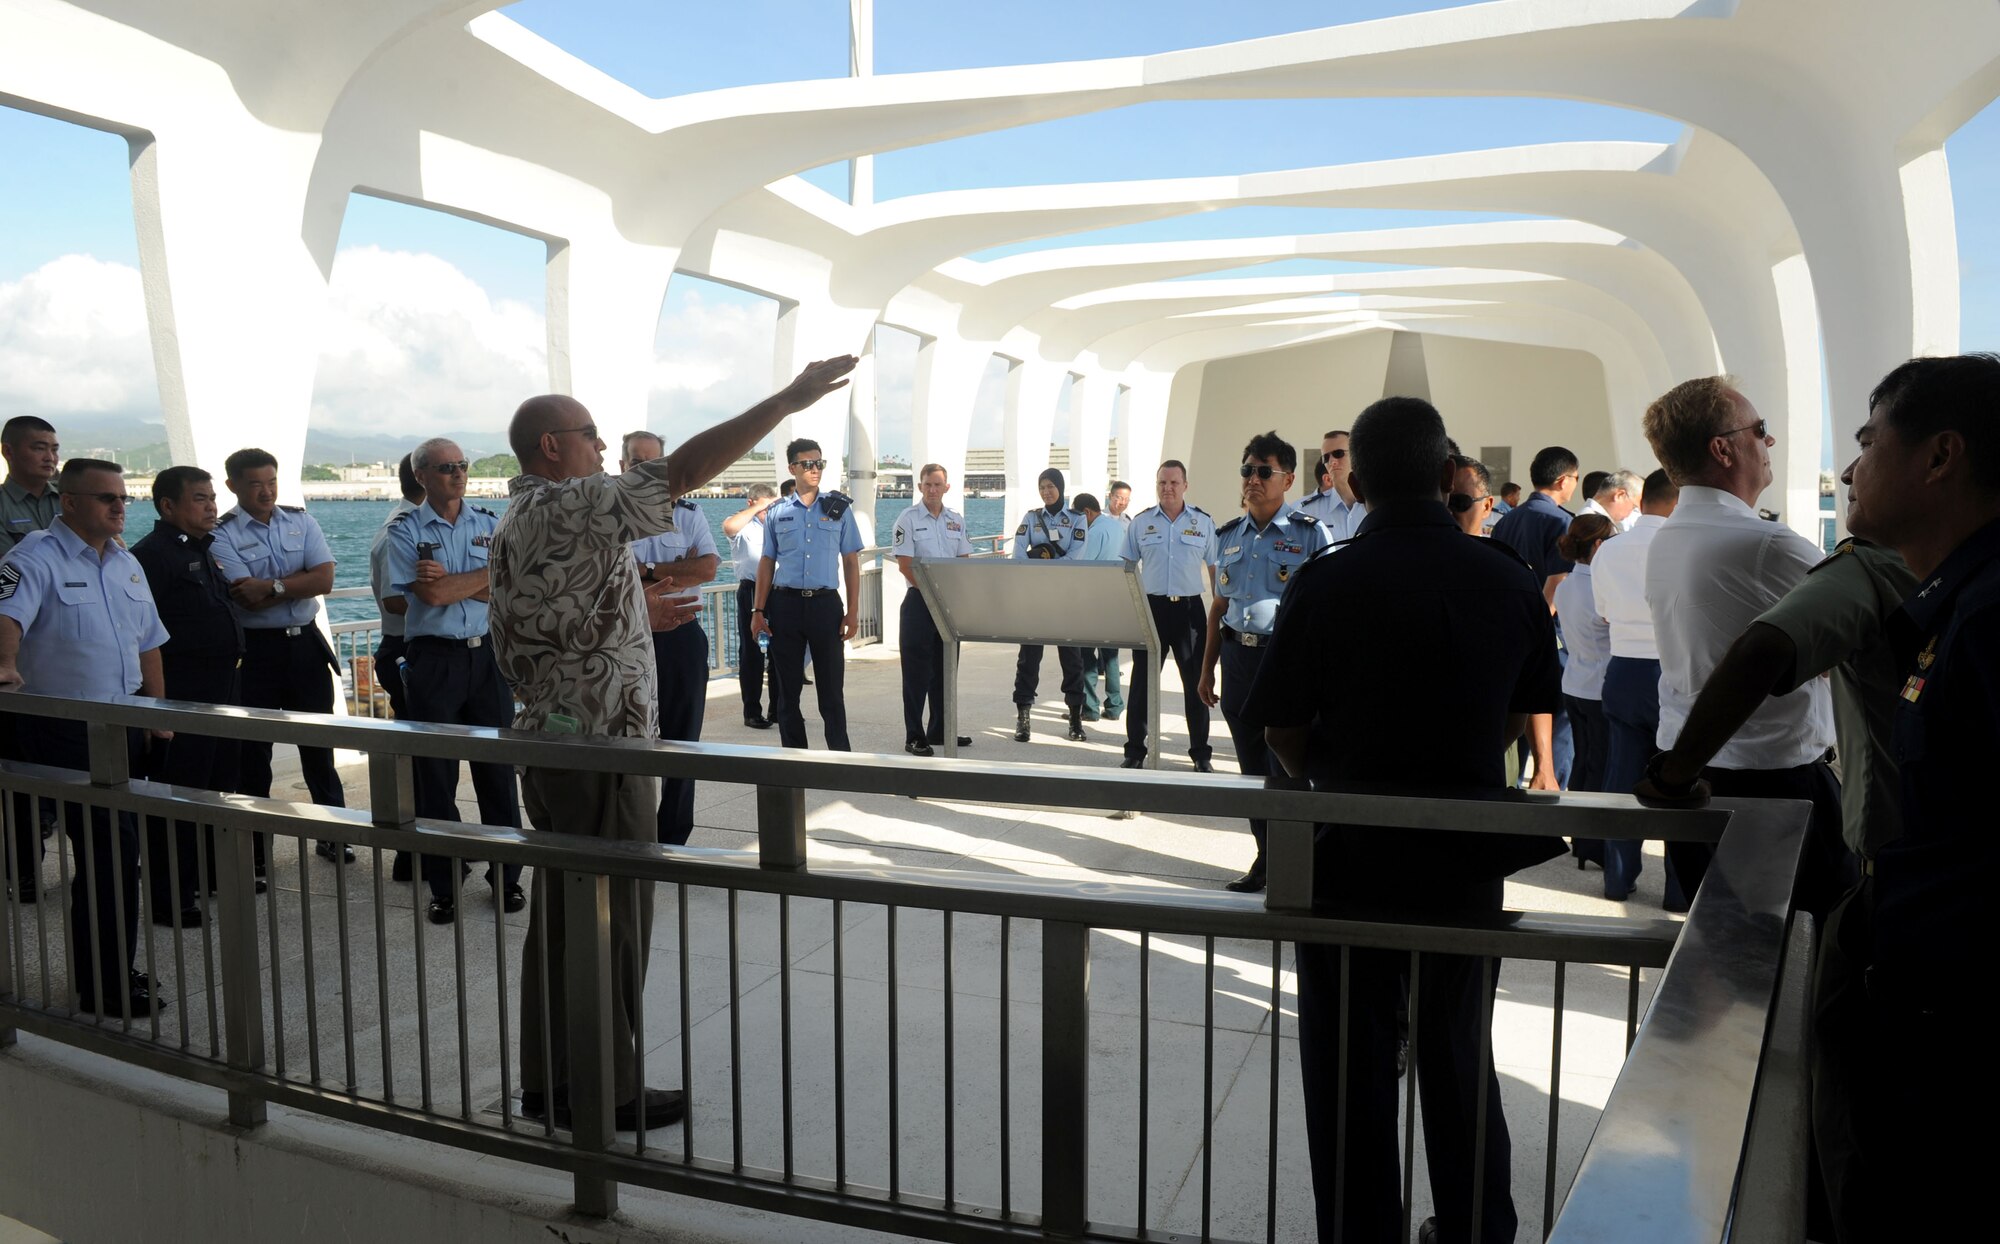 Pacific Rim Airpower Symposium attendees listen to a tour guide aboard the WWII Valor in the Pacific National Monument during a tour of Pearl Harbor historic sites Sept. 22, 2015, in Honolulu, Hawaii. Senior officer and enlisted airmen from nations throughout the Indo-Asia-Pacific region attended the symposium to discuss ways to improve cooperation, leadership and coordination efforts. (U.S. Air Force photo by Staff Sgt. Alexander Martinez/Released)